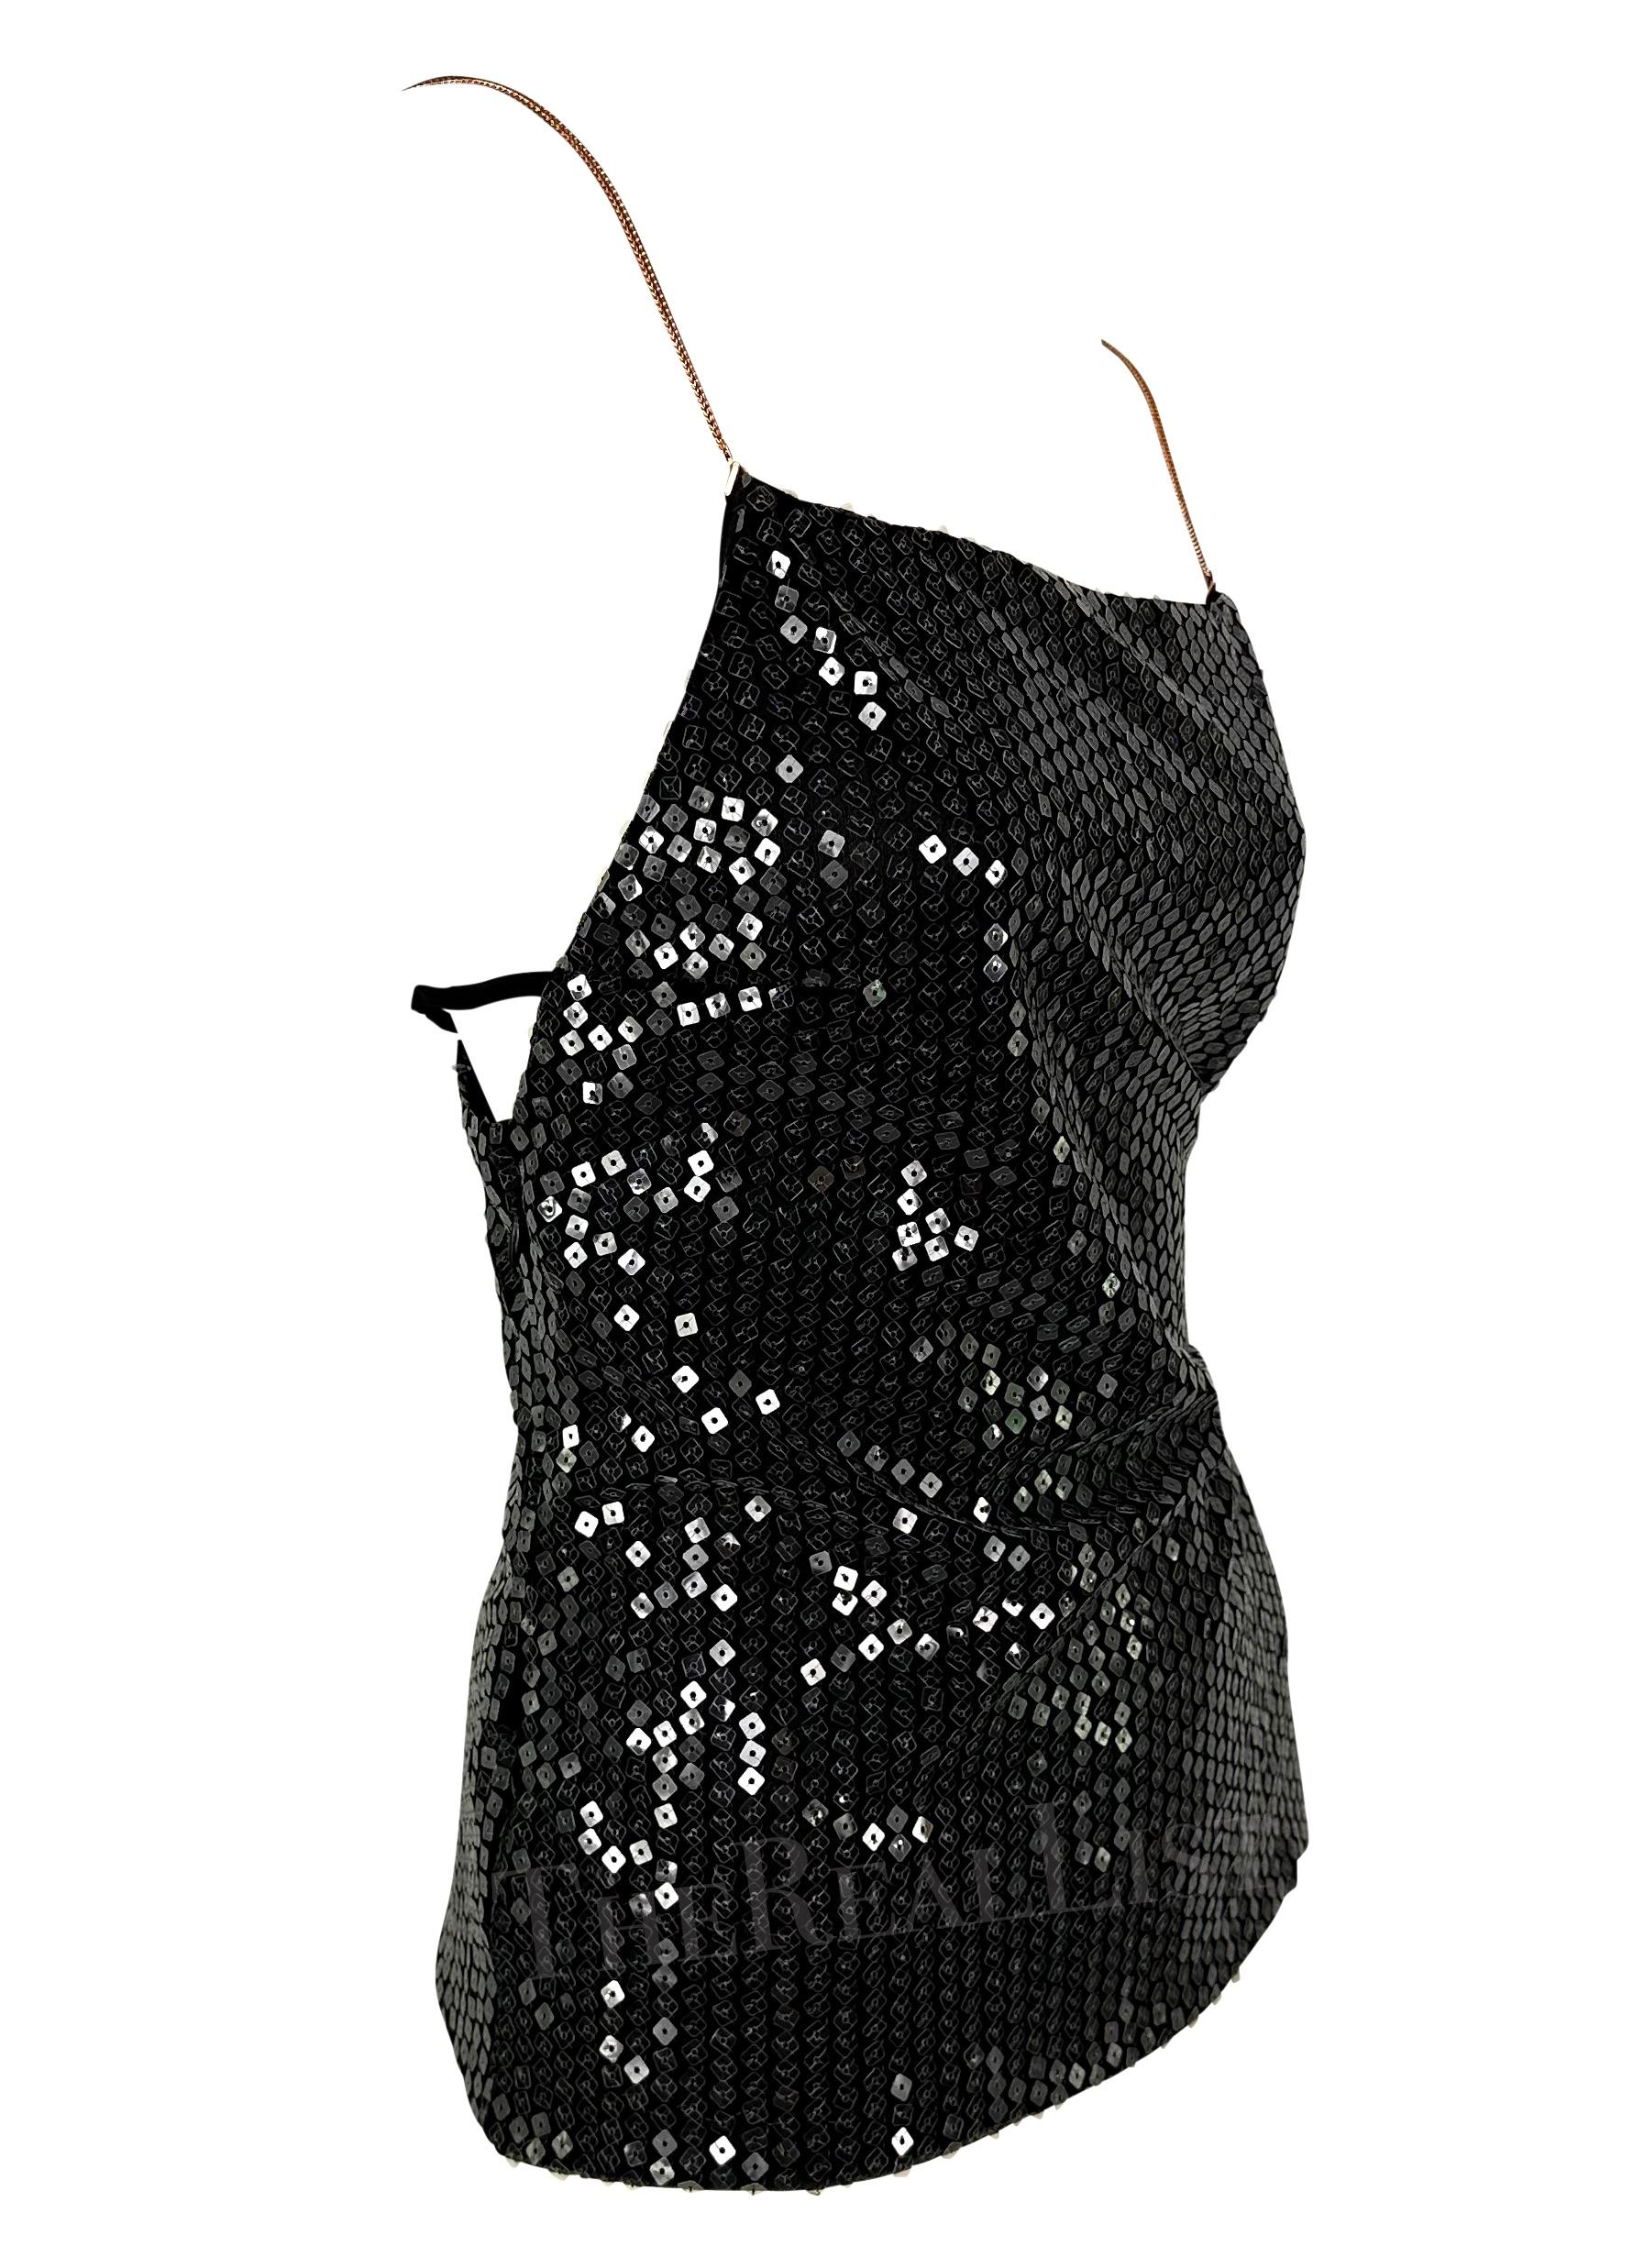 Presenting a fabulous black rhinestone Gianni Versace tank top, designed by Donatella Versace. From 1999, this top is covered in transparent sequins that perfectly catch the light with every movement. The top features a square neckline, and metal